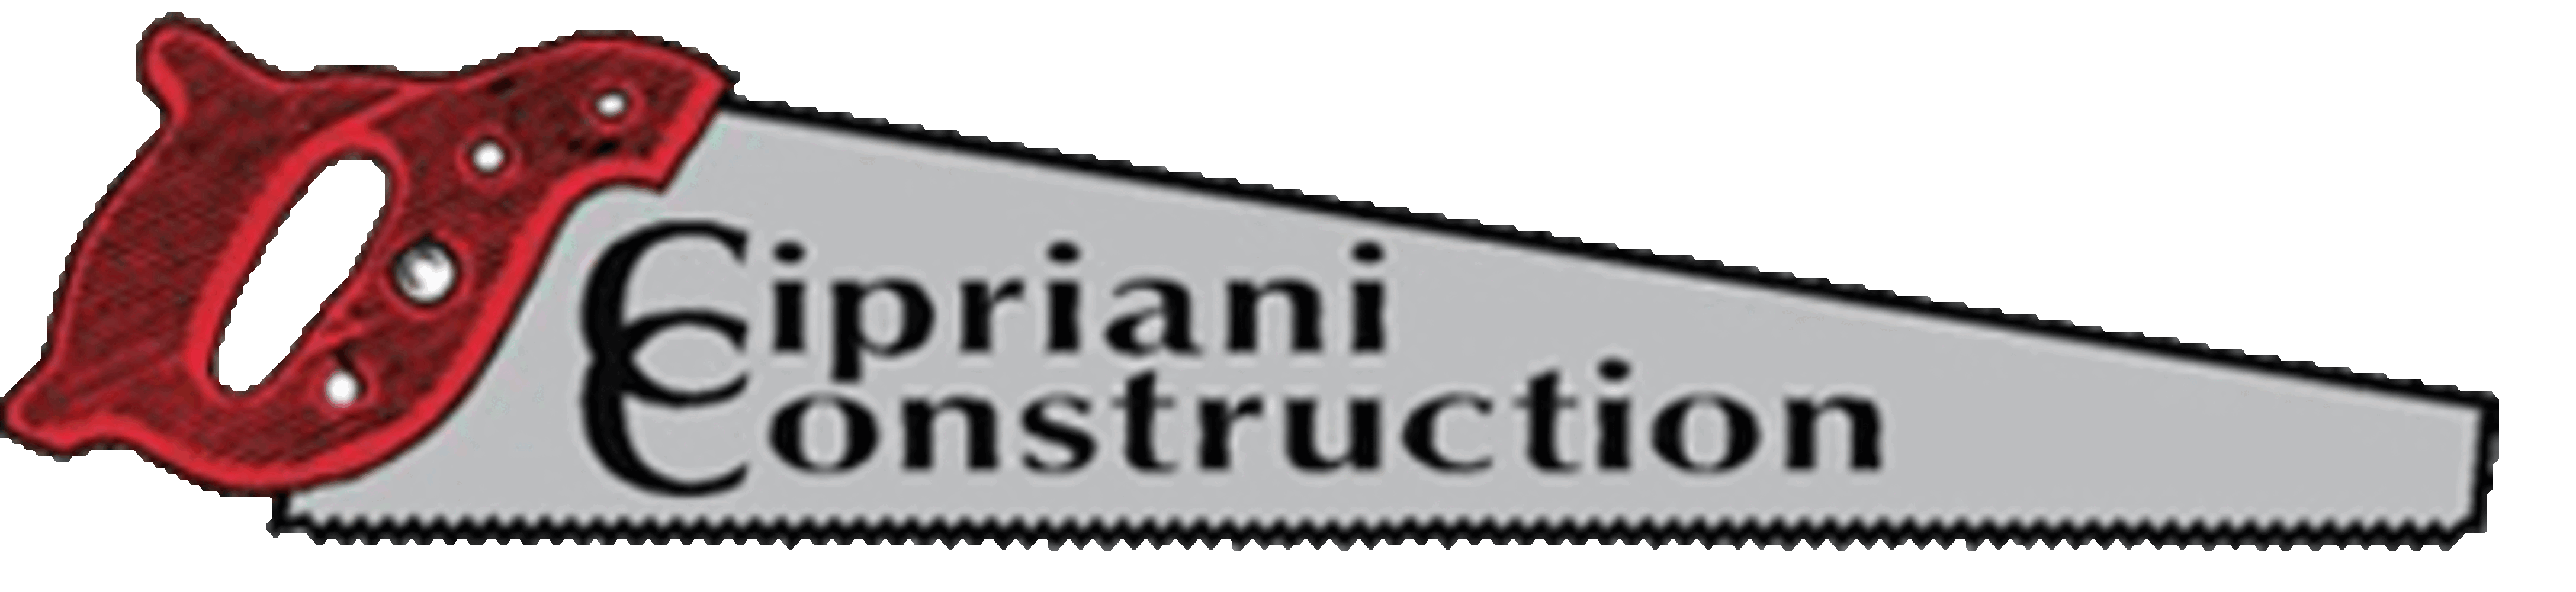 Projects by Cipriani Construction